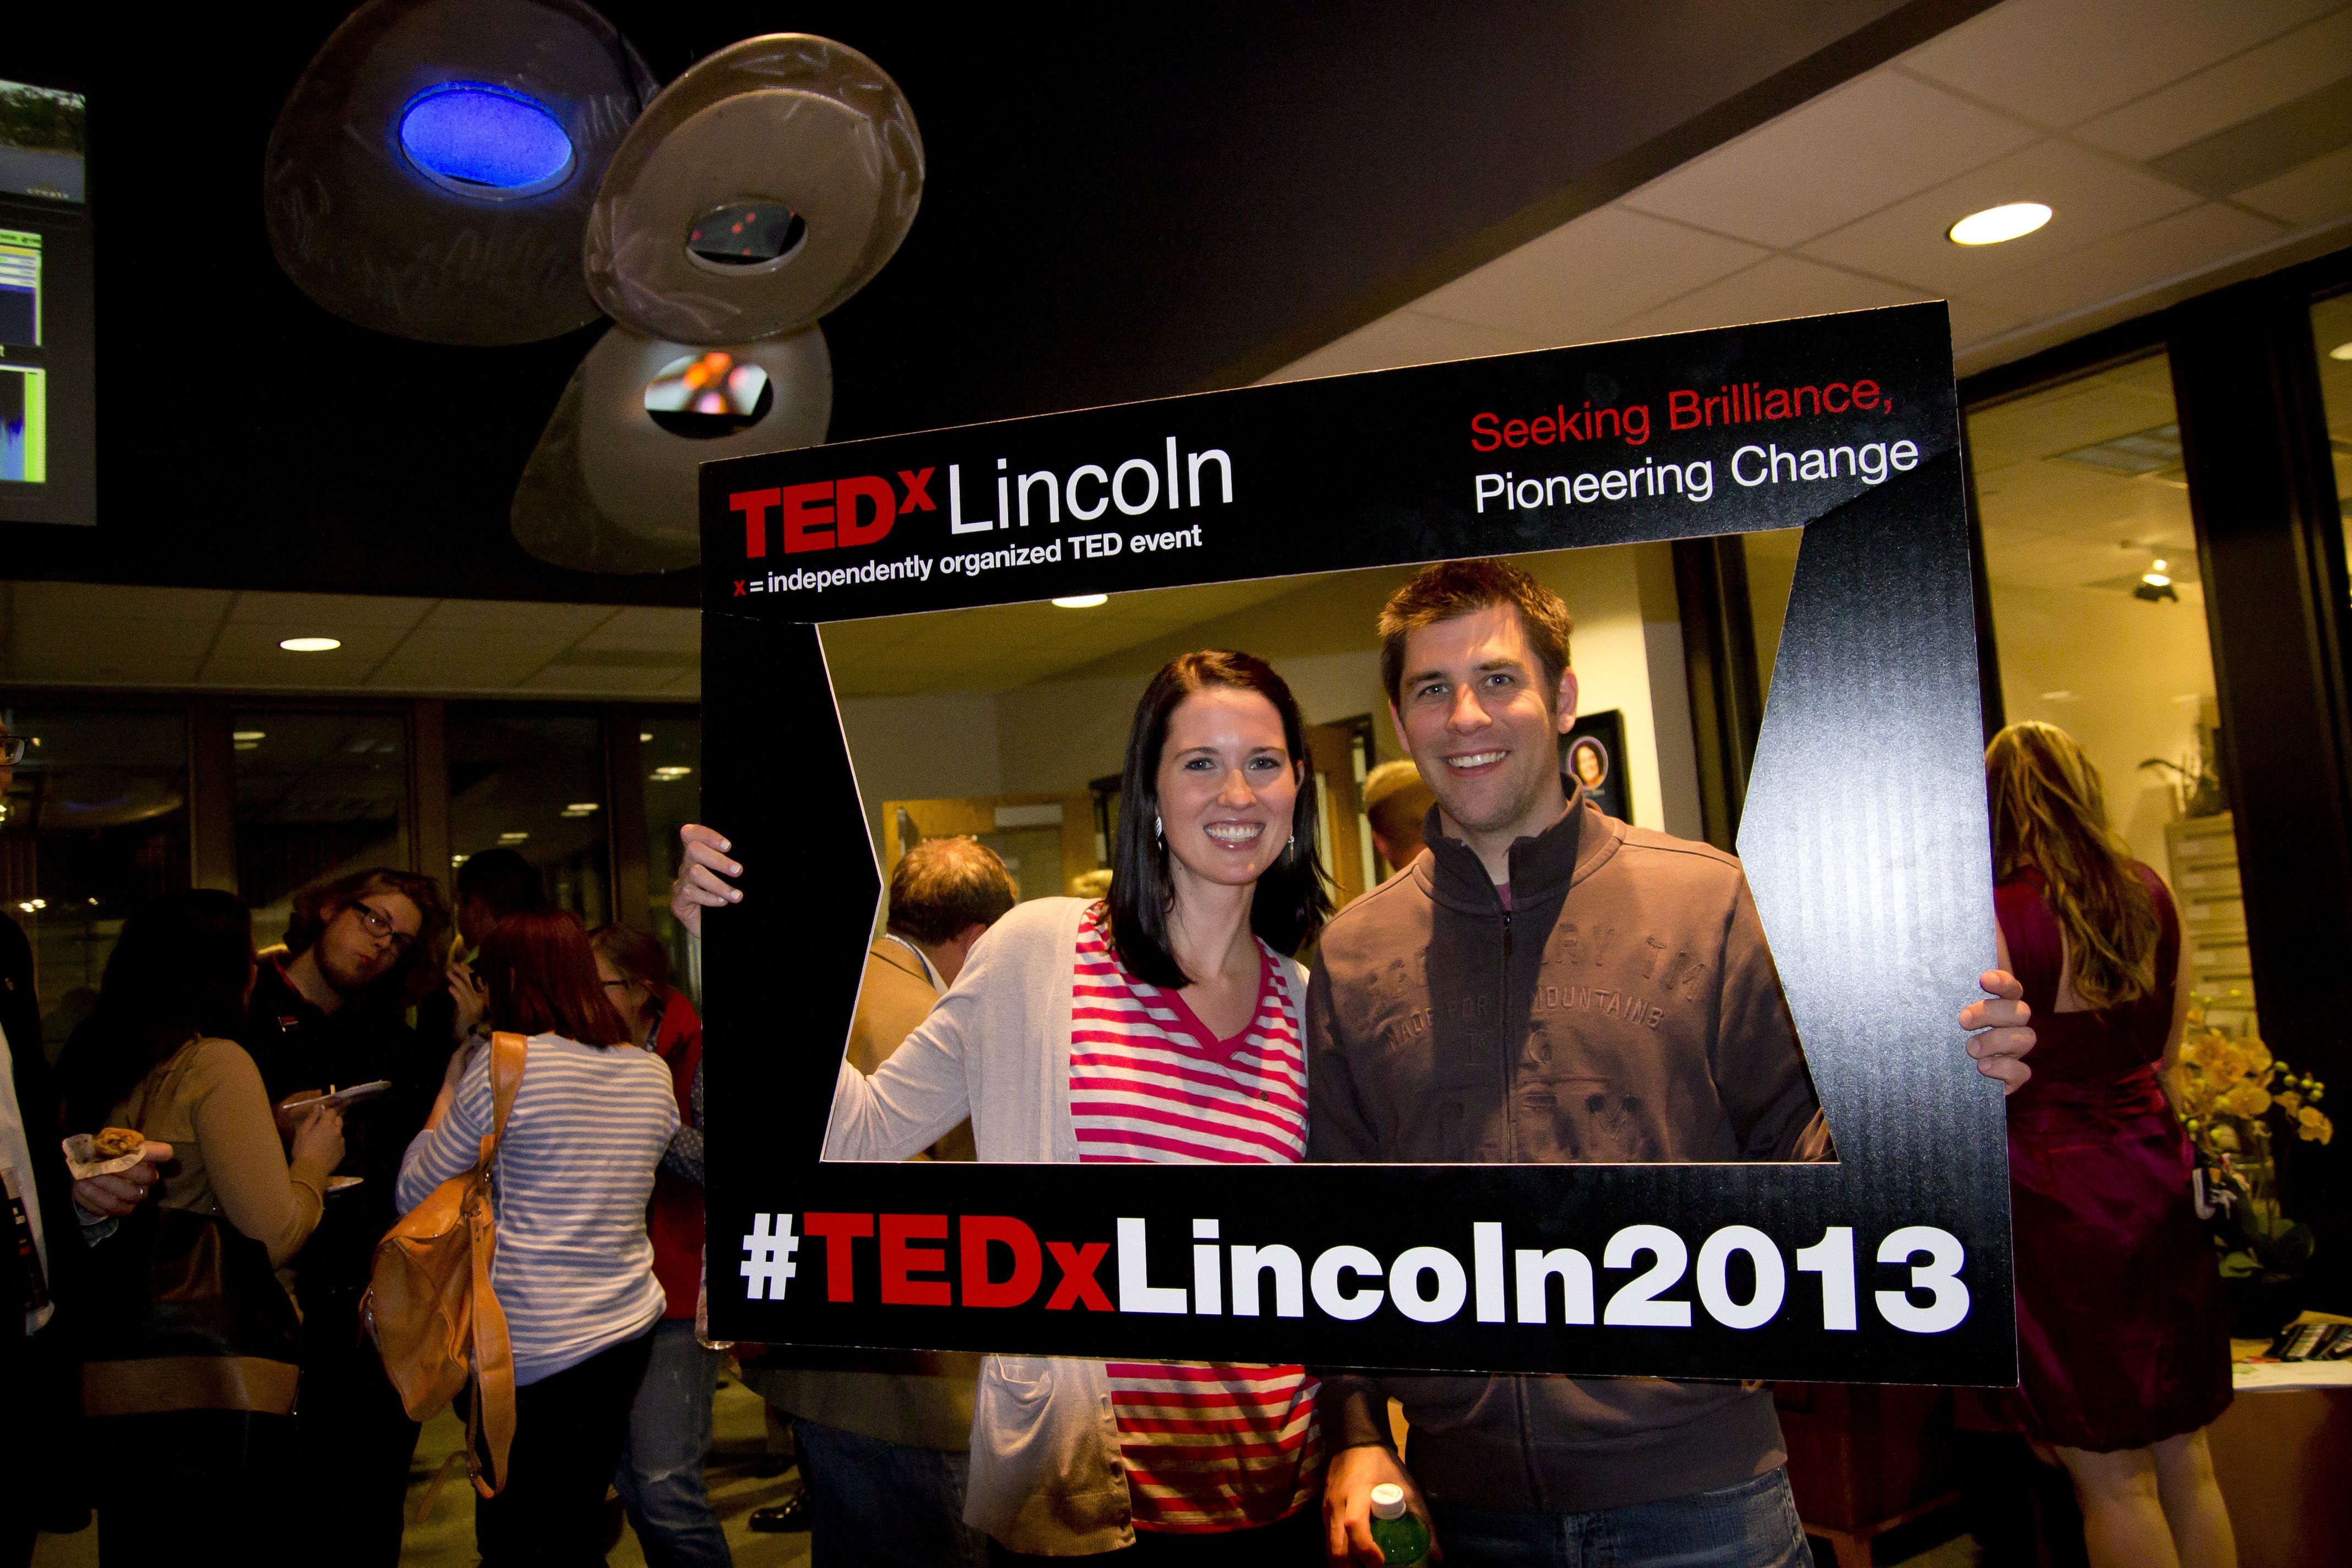 Clint! spoke at TEDxLincoln